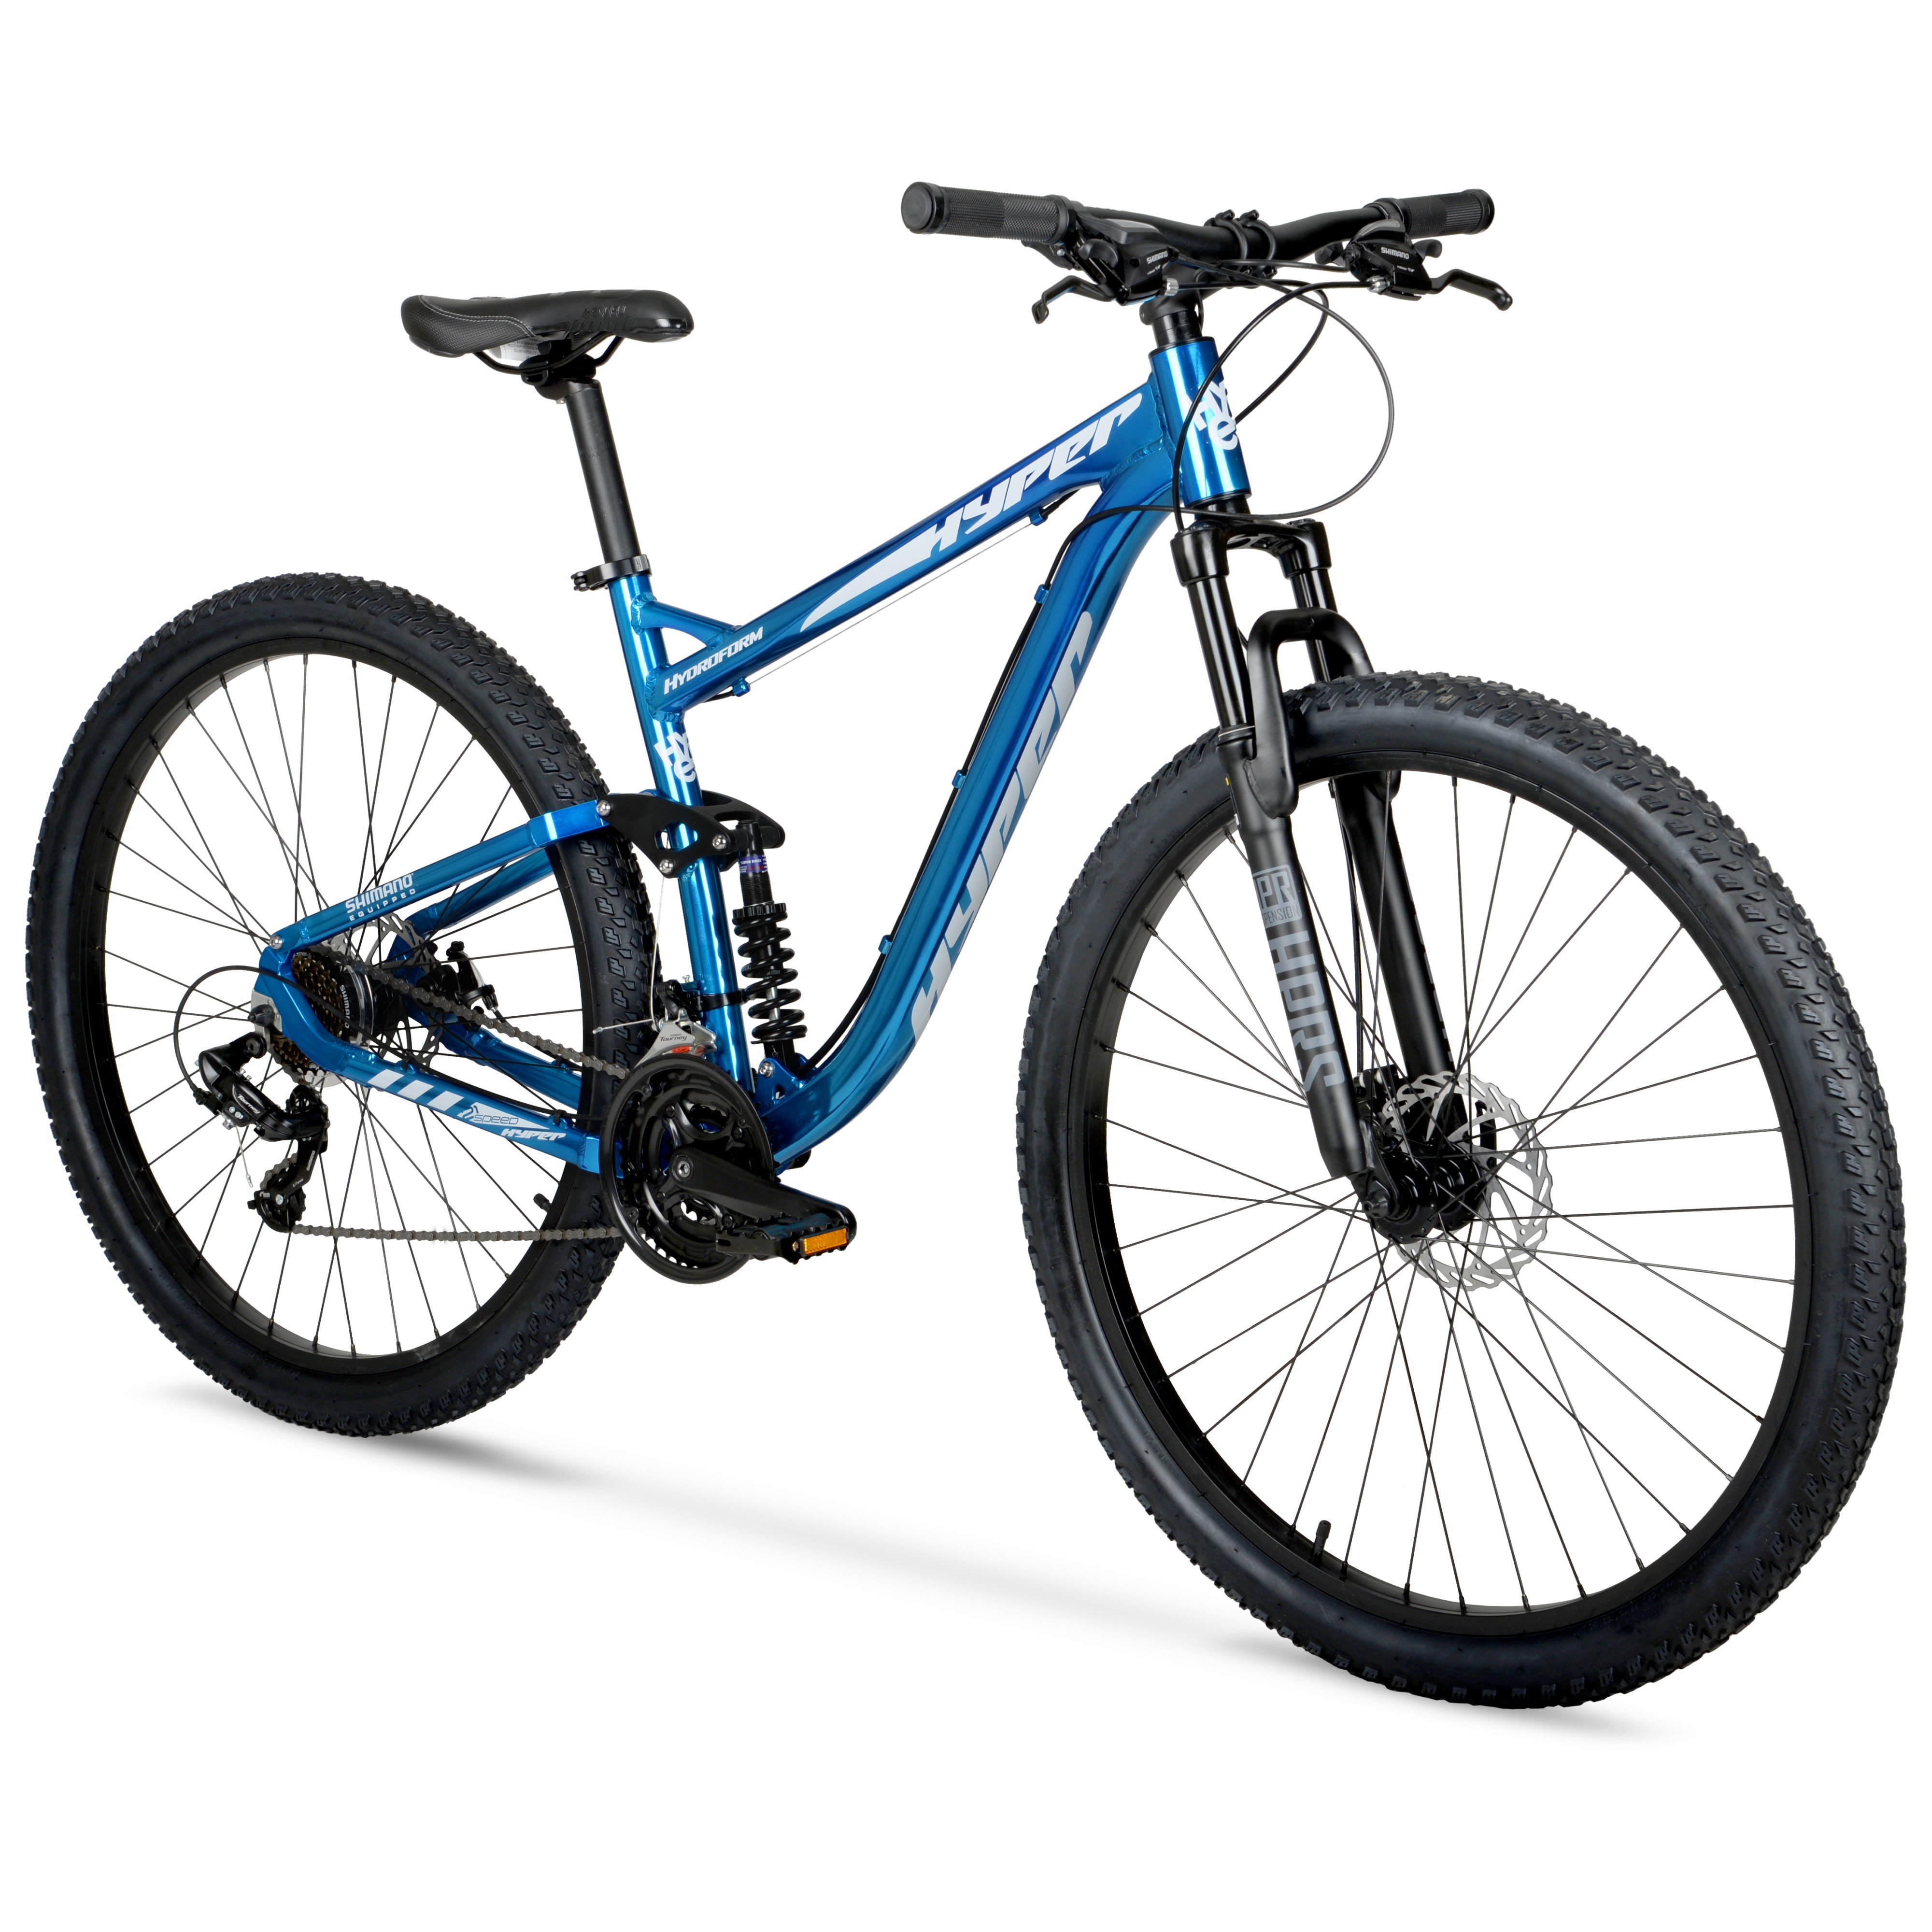 Hyper Bicycles 29" Men's Ultra Lightweight Hydro-Form Aluminum Mountain Bike - image 1 of 2